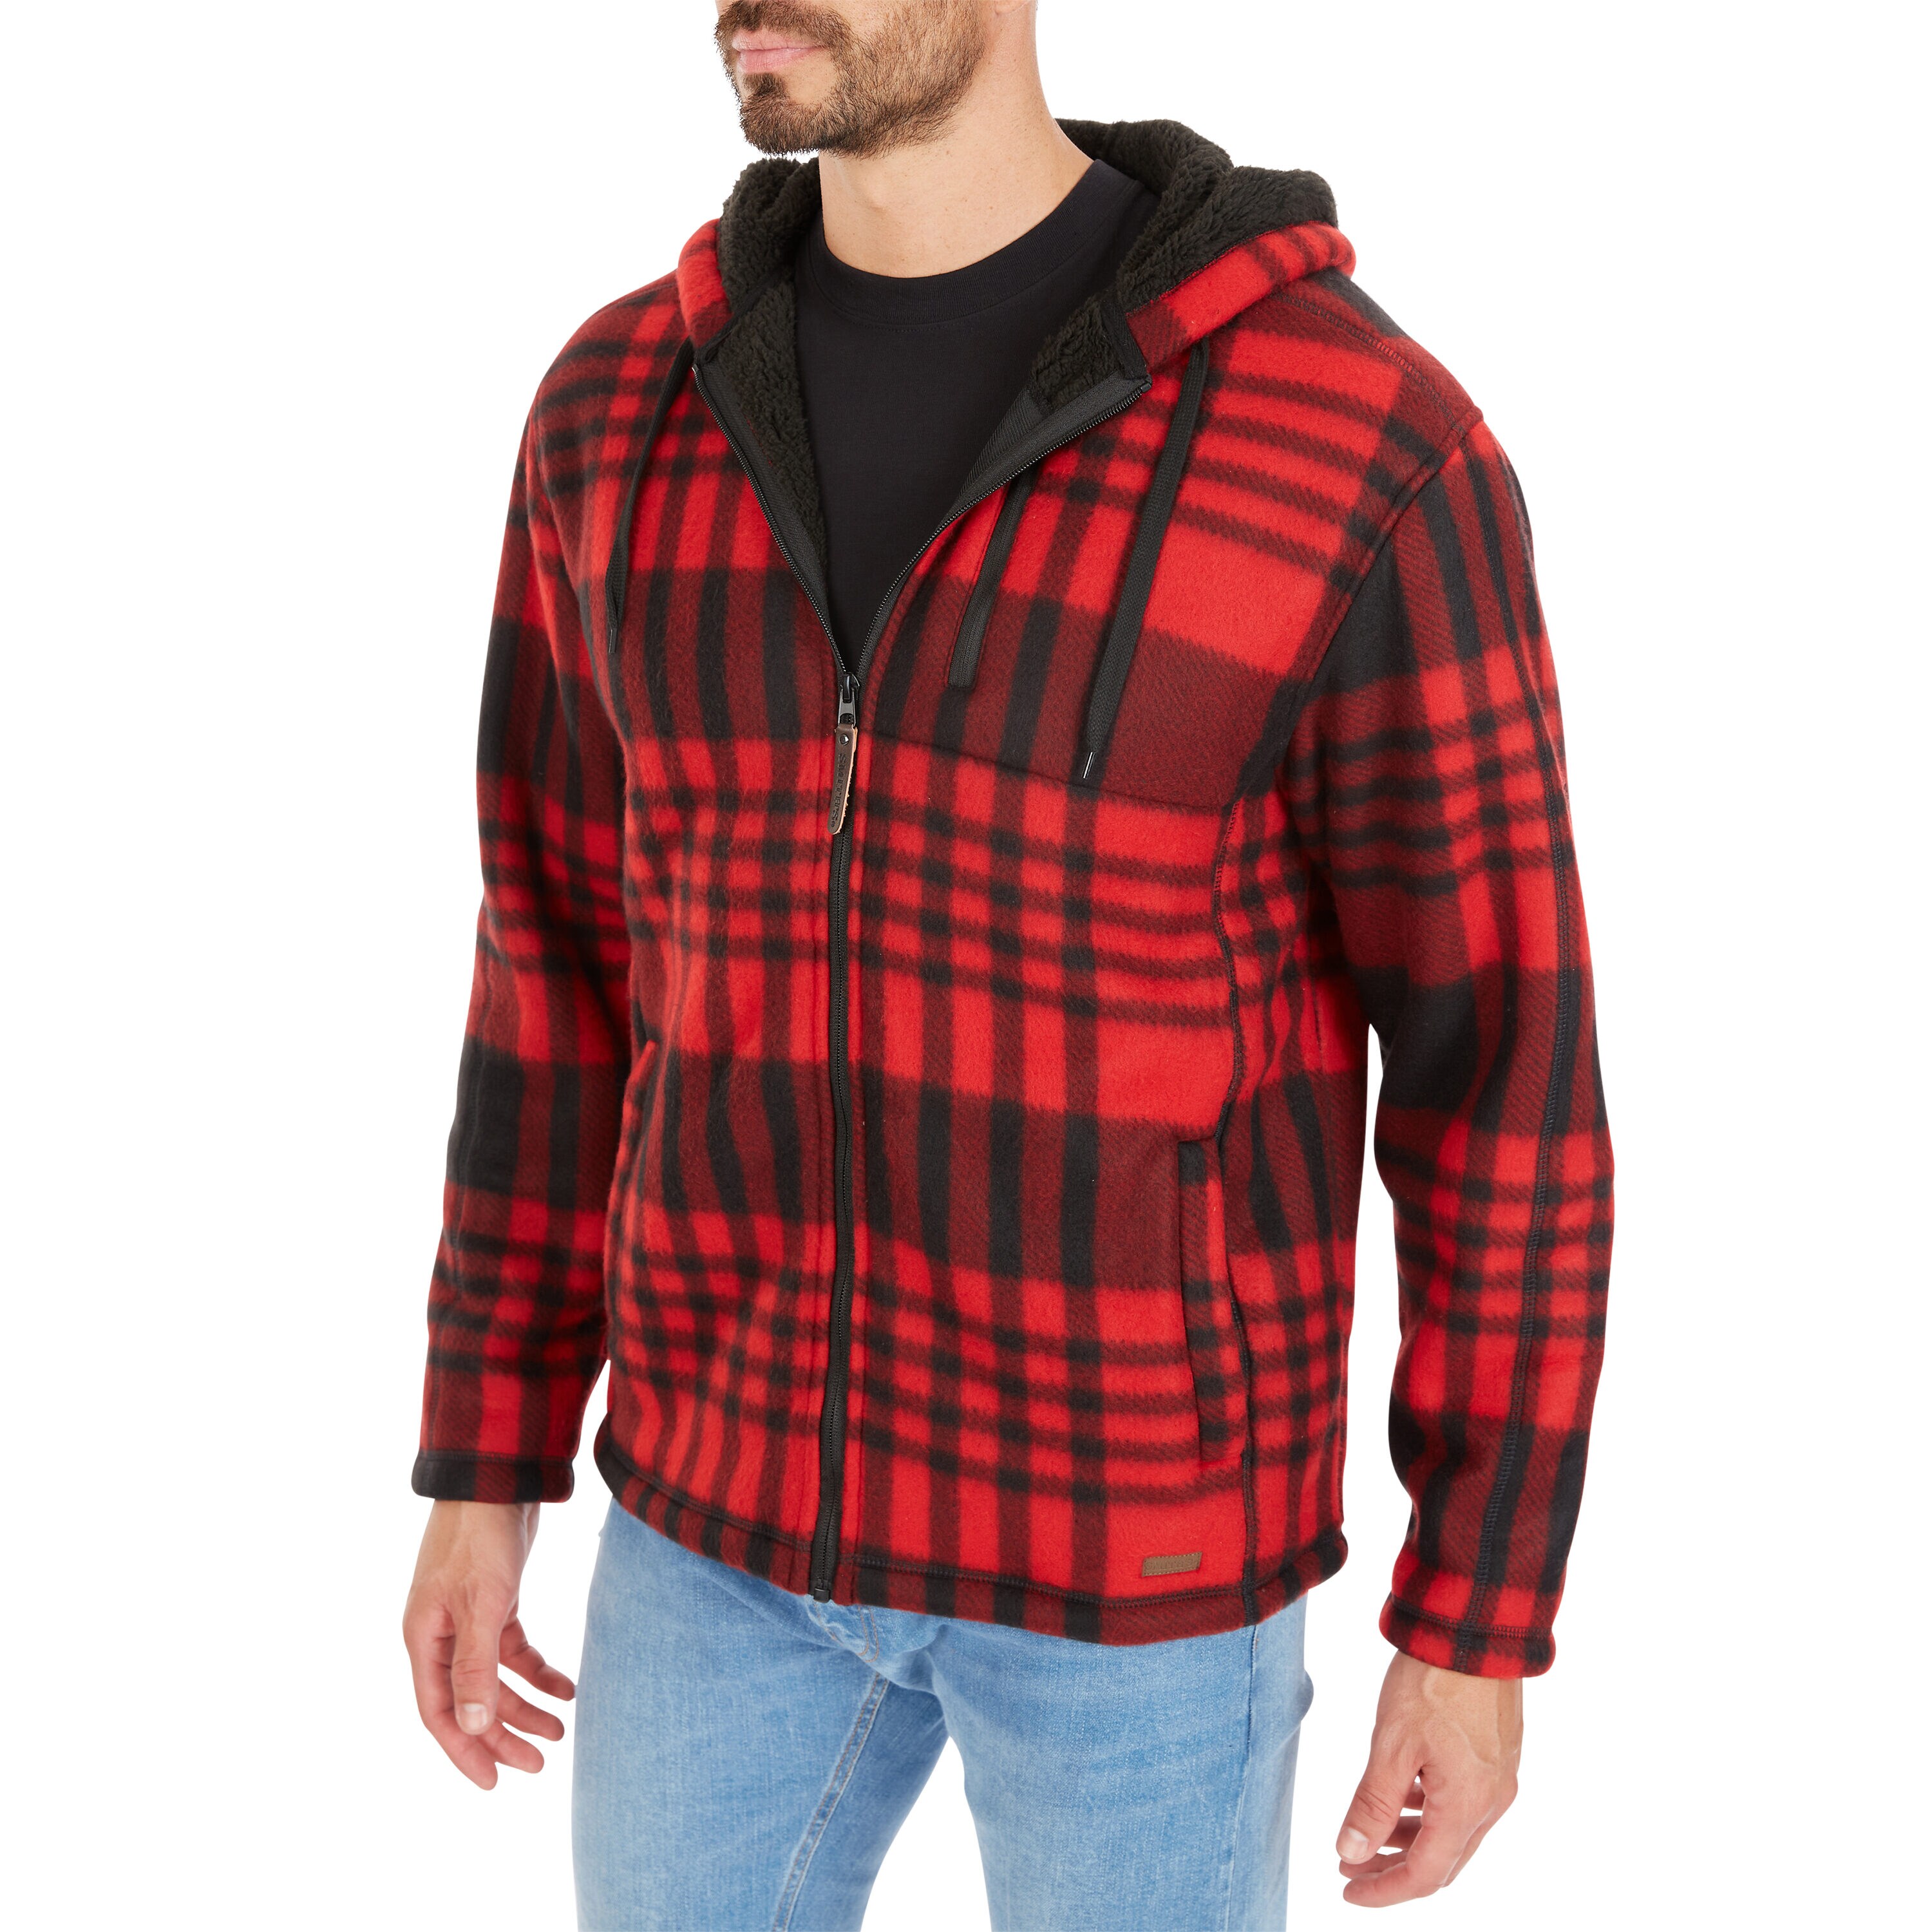 Smith\'s Workwear Butter-Sherpa Coats the Hooded Polar Plaid Fleece Jacket at Lined in Full Work Jackets Zip department 